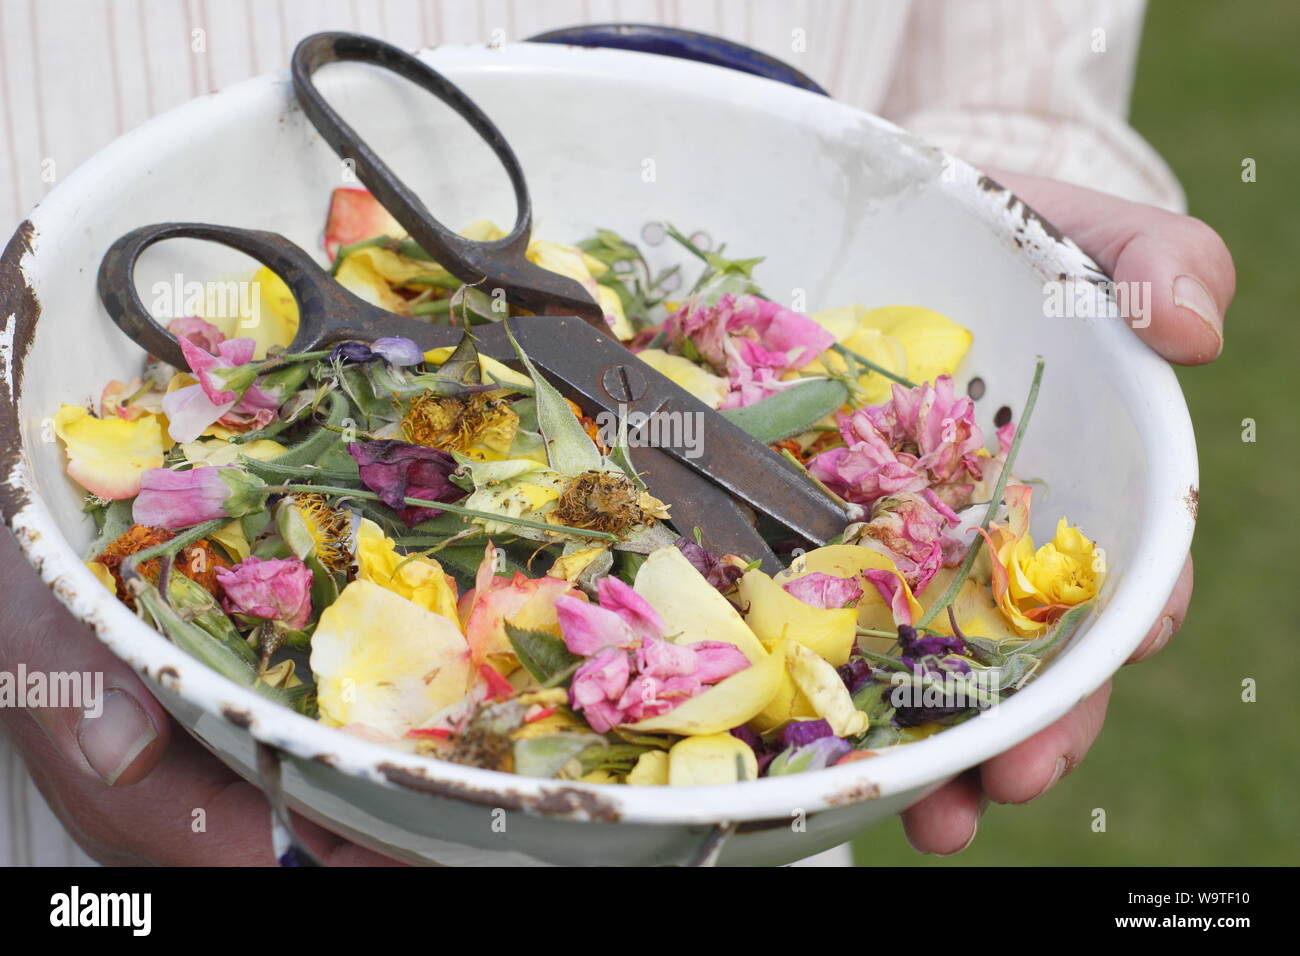 Flower deadheads - roses, marigolds and sweet peas - collected into an old colander by a male gardener in a summer garden. UK Stock Photo